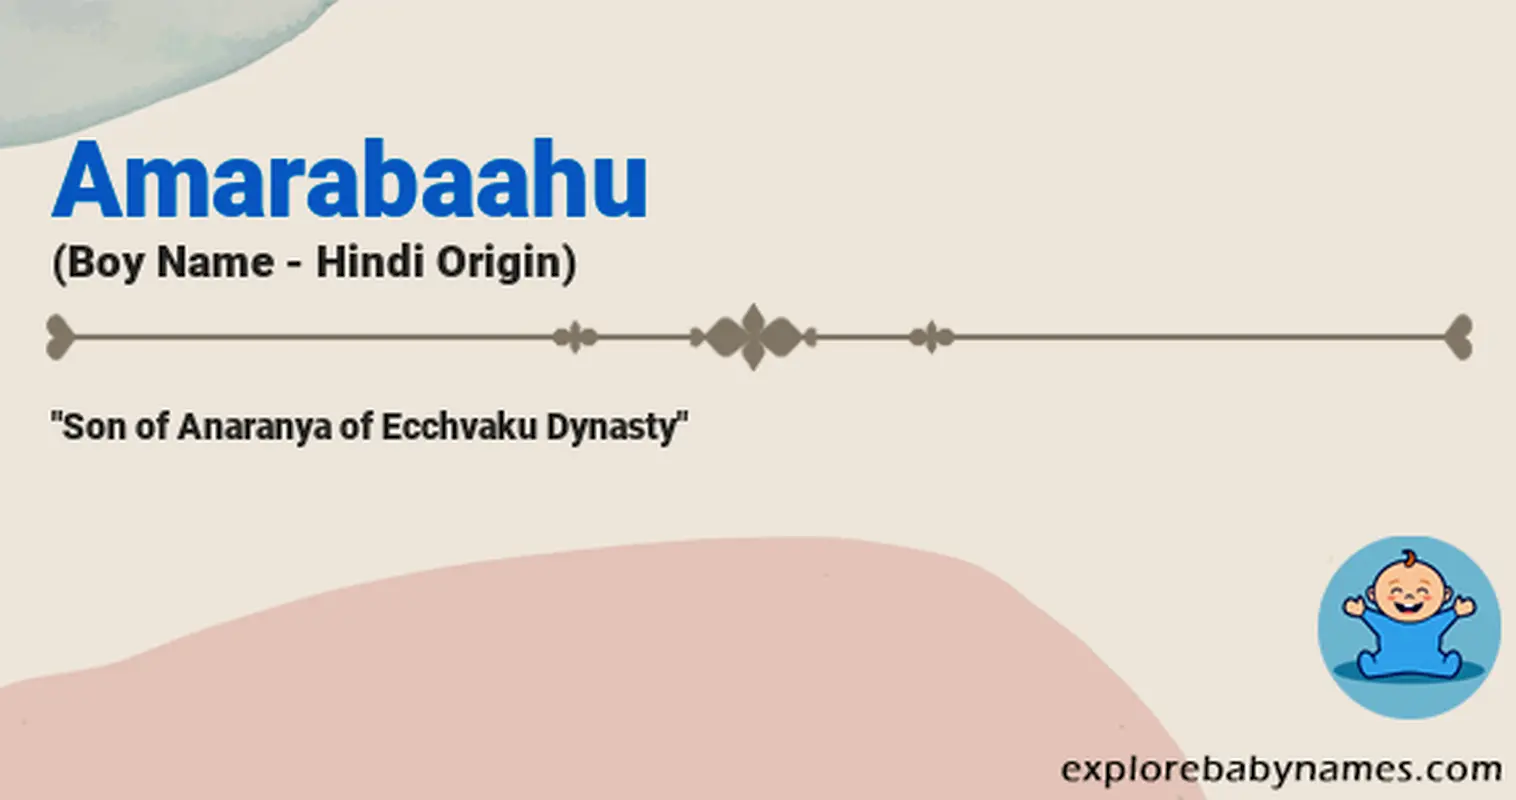 Meaning of Amarabaahu